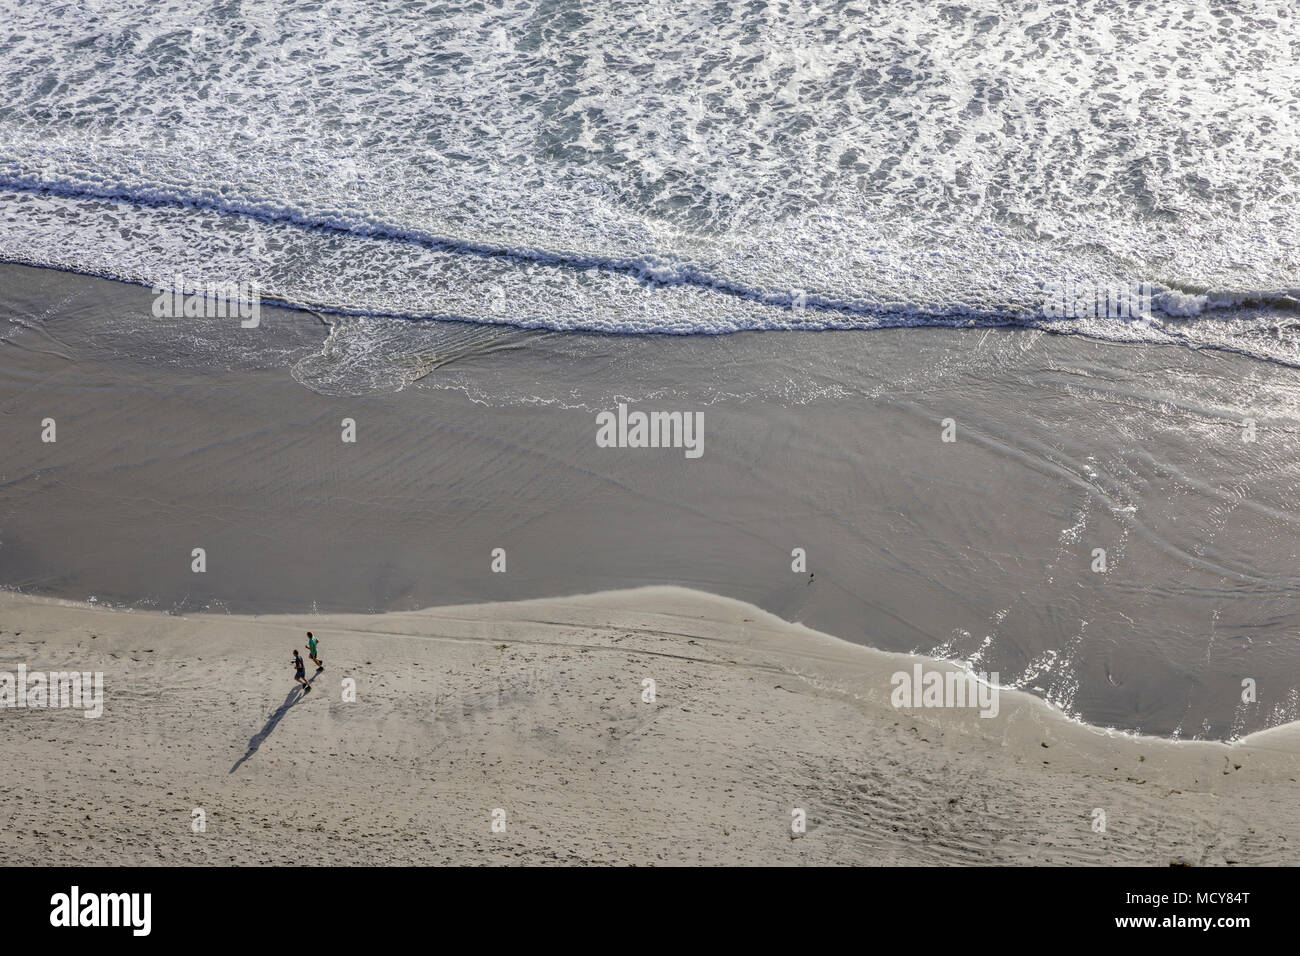 A high overhead view of a person walking along the beach with waves rolling in. Stock Photo